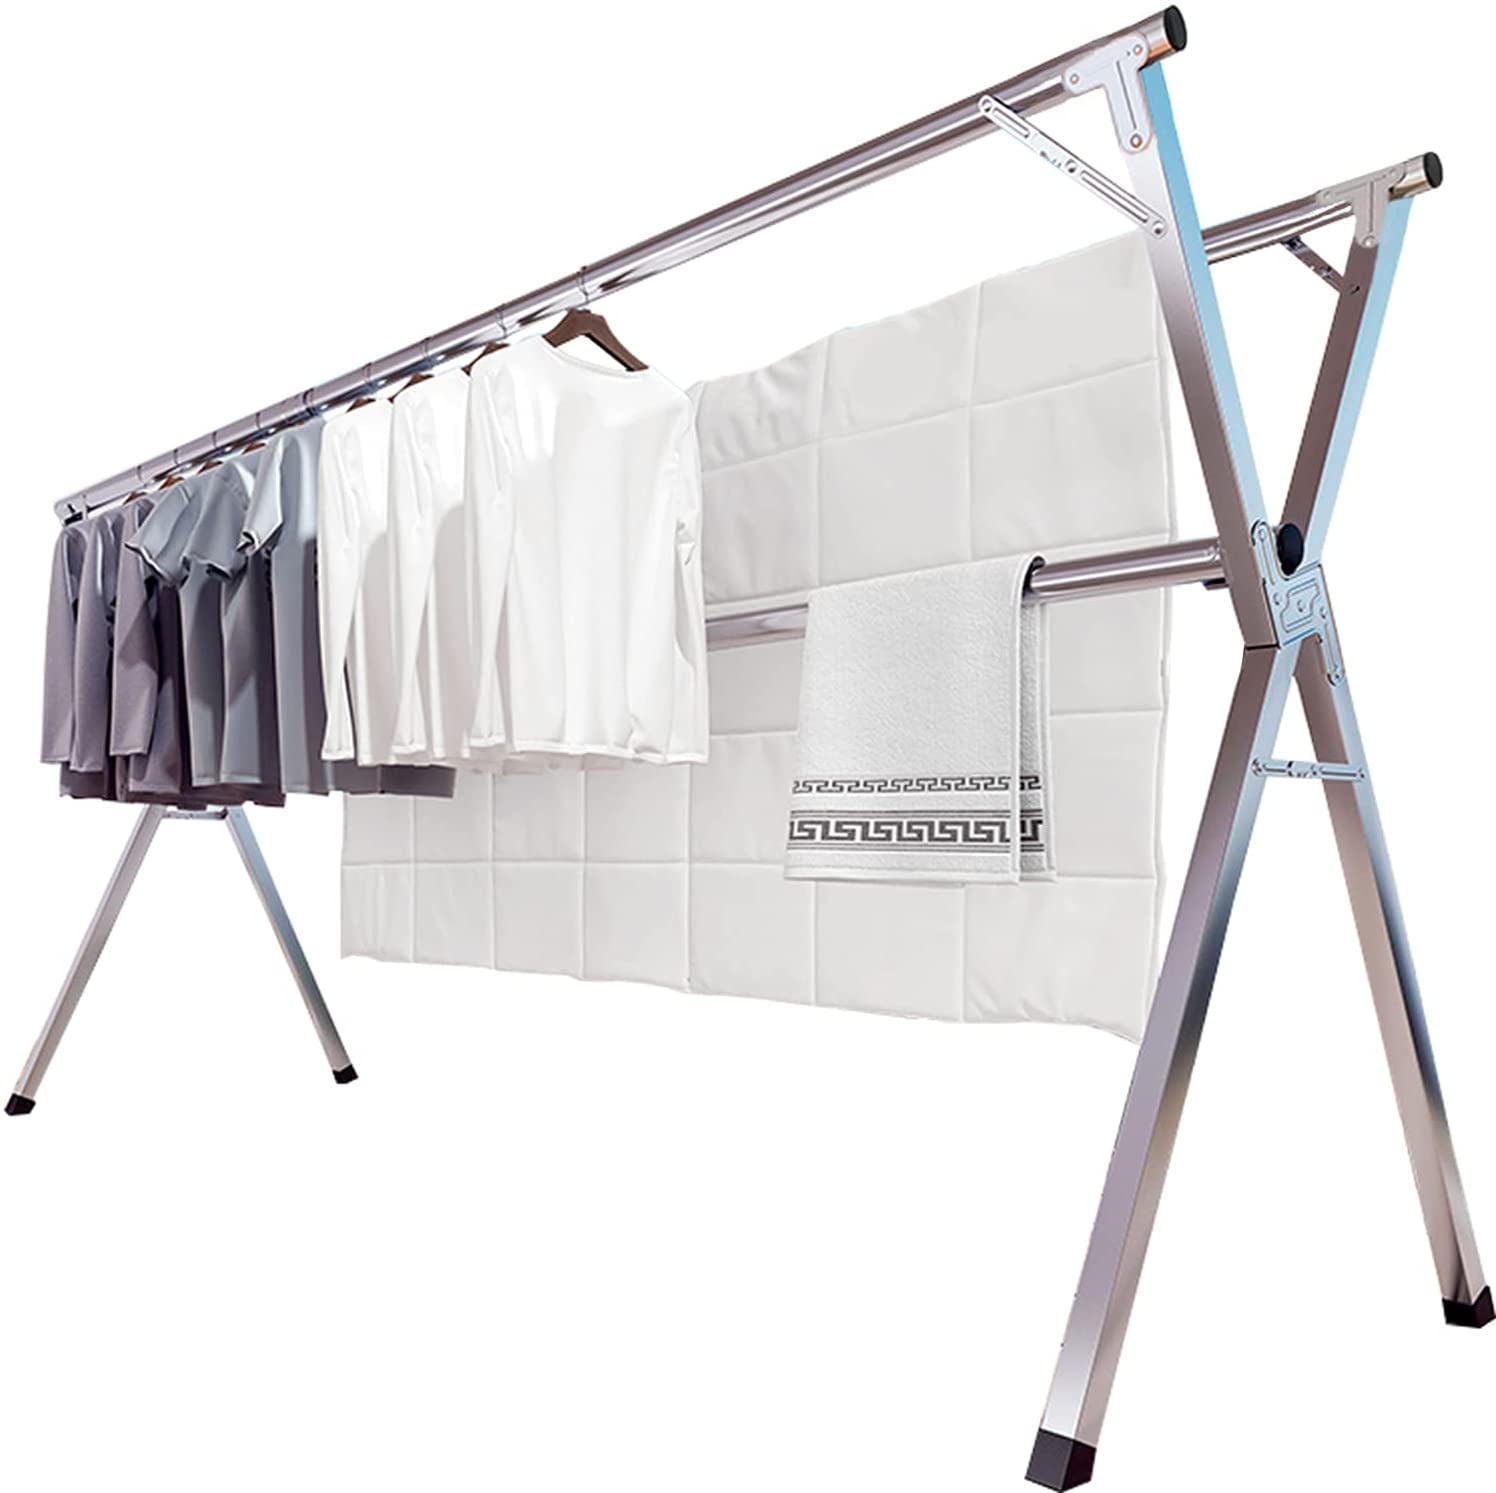 Kitchen Folding and Space saving Indoor Outdoor Folding Extendable Tripod Clothes Drying Rack Great Organisation for Laundry Room With carry bag included Living room Garden Bedroom 